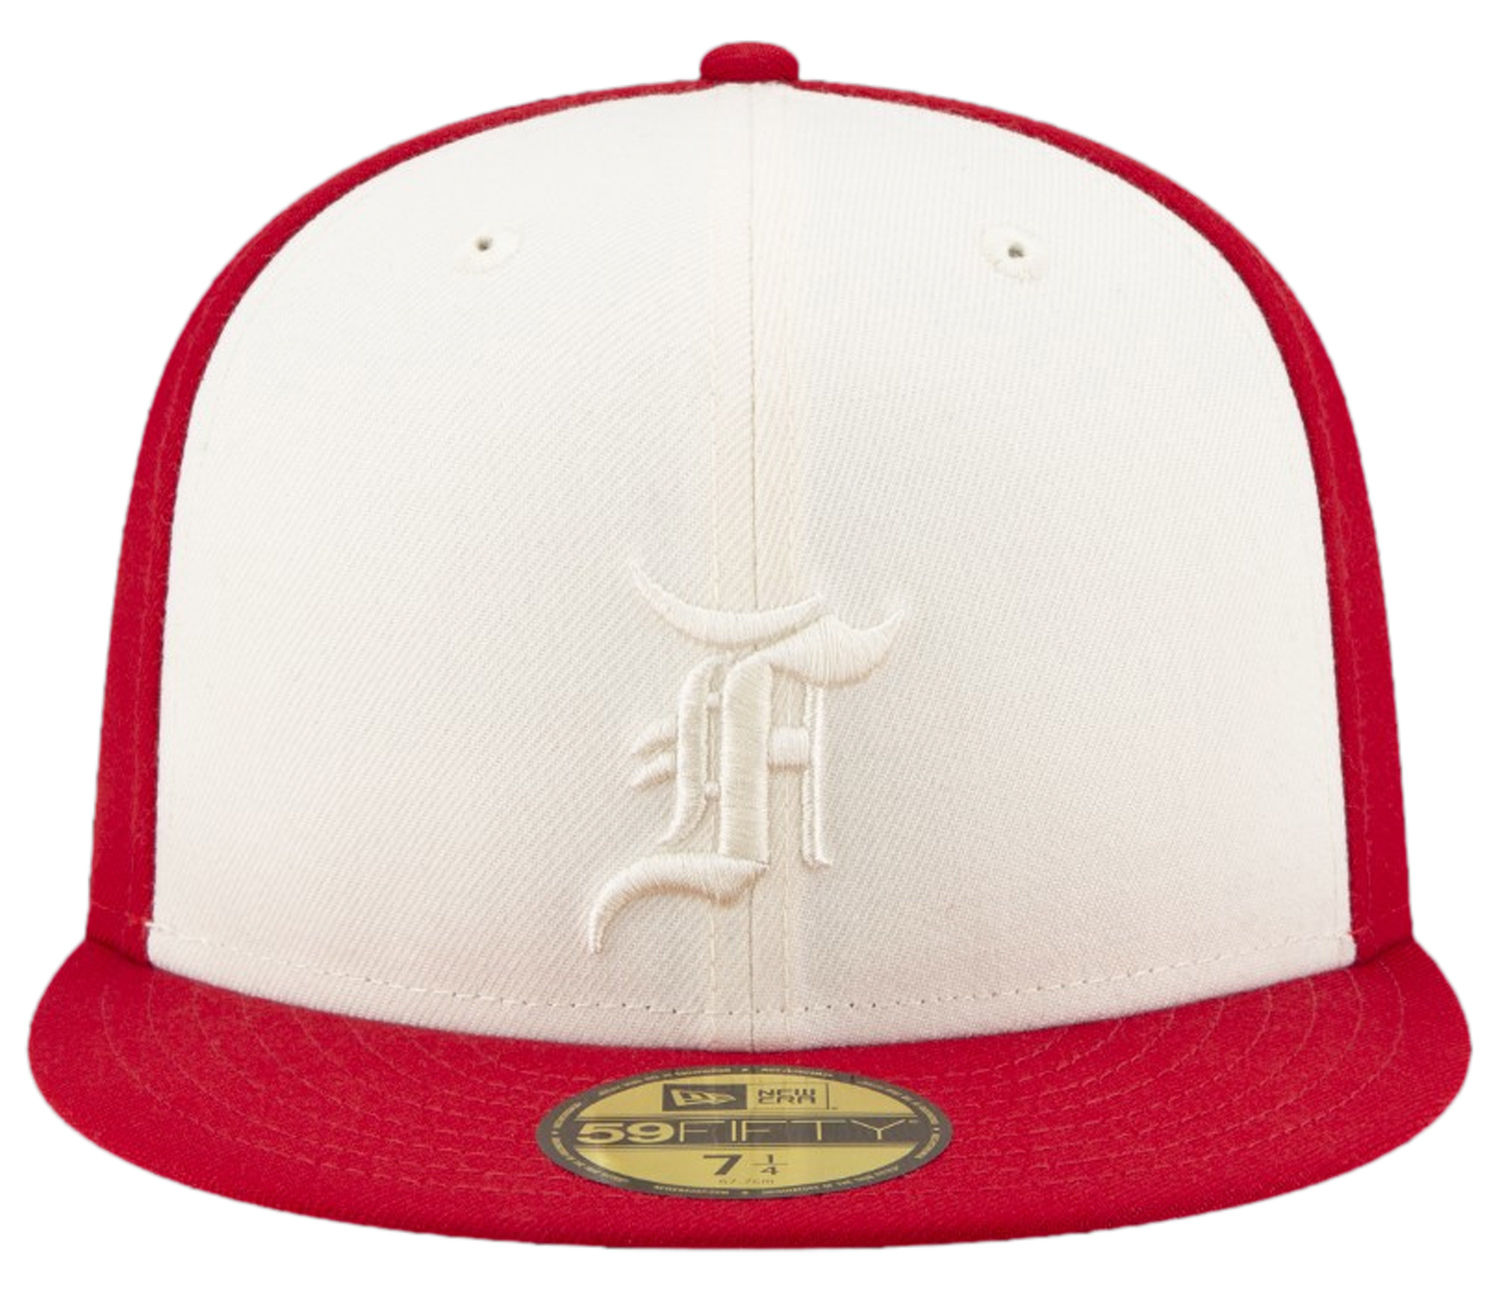 fear-of-god-new-era-59fifty-fitted-cap-colorblock-red-white-2